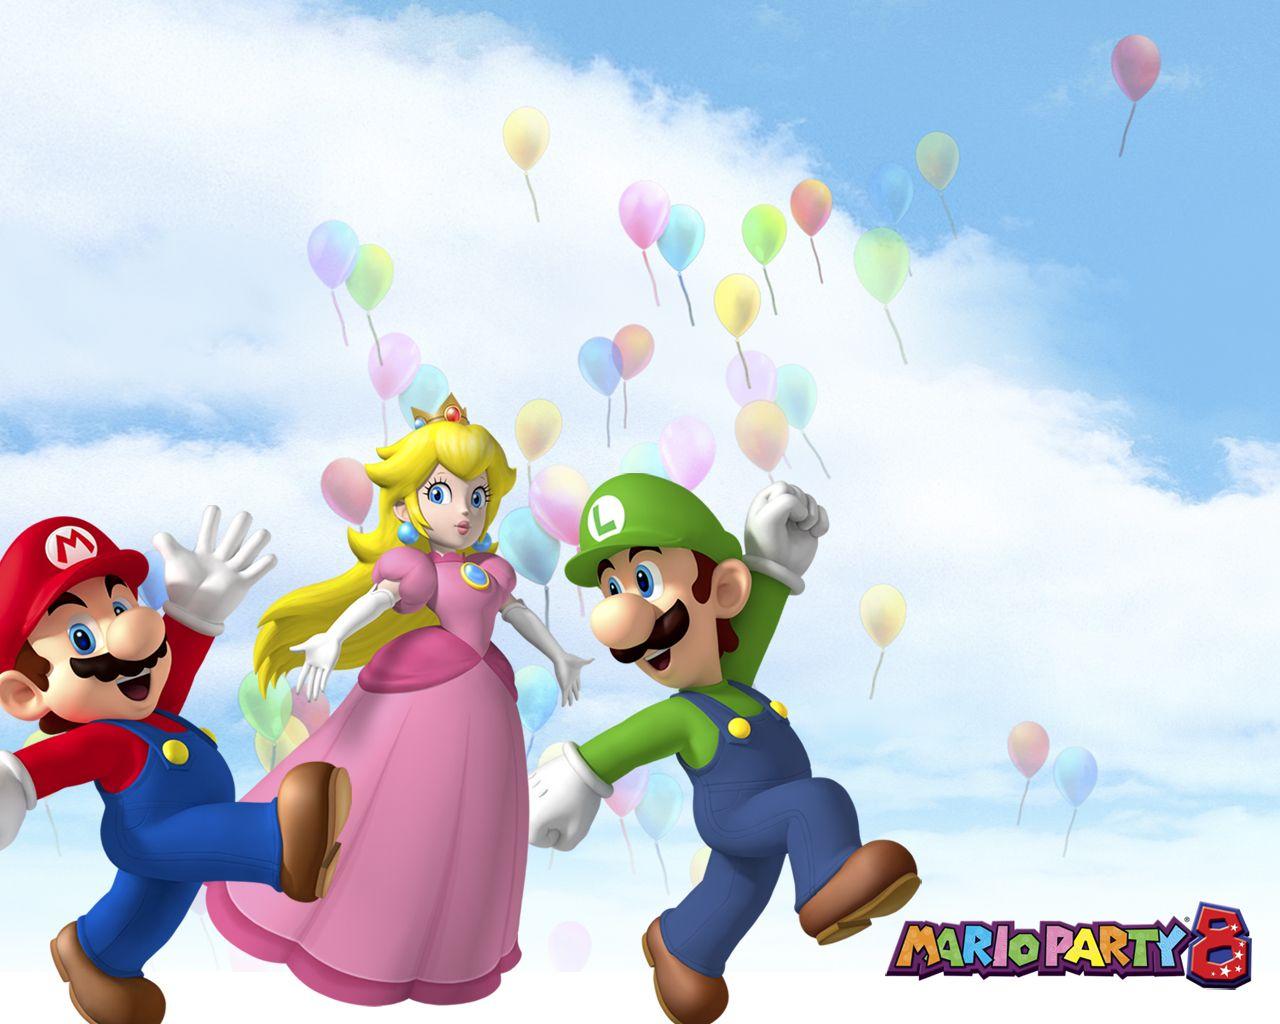 Mario Party 8 Wallpaper and Background Imagex1024